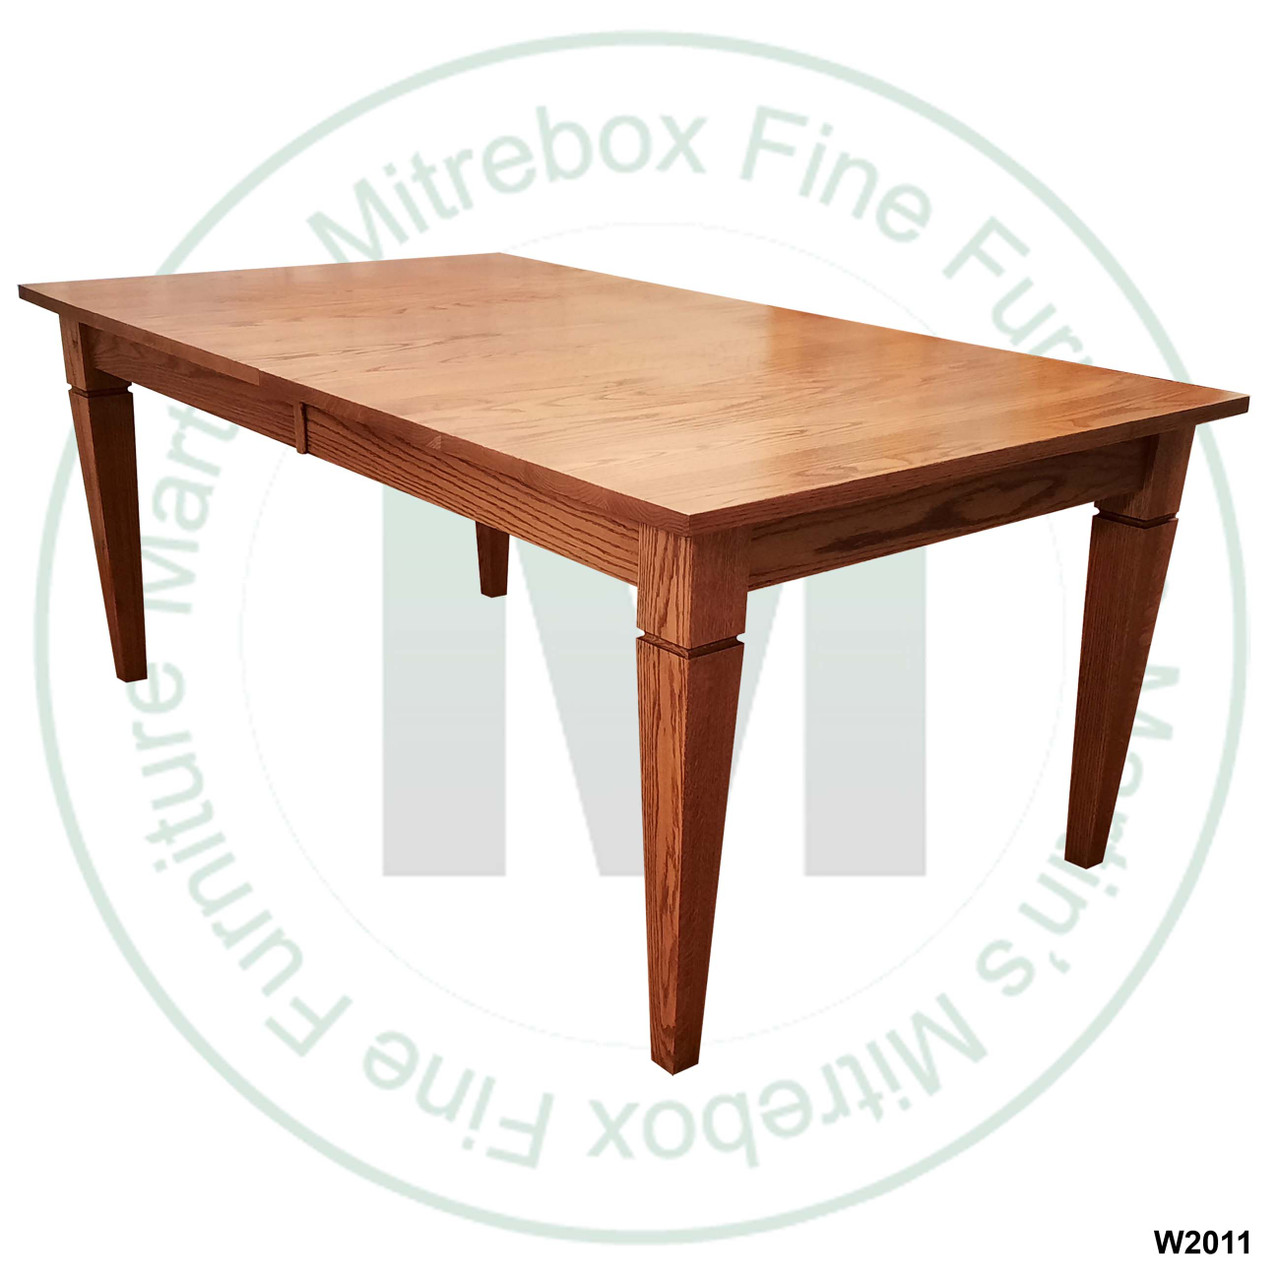 Oak Reesor Solid Top Harvest Table 48''D x 84''W x 30''H Table Has 1'' Thick Top And 2 - 16'' Extensions